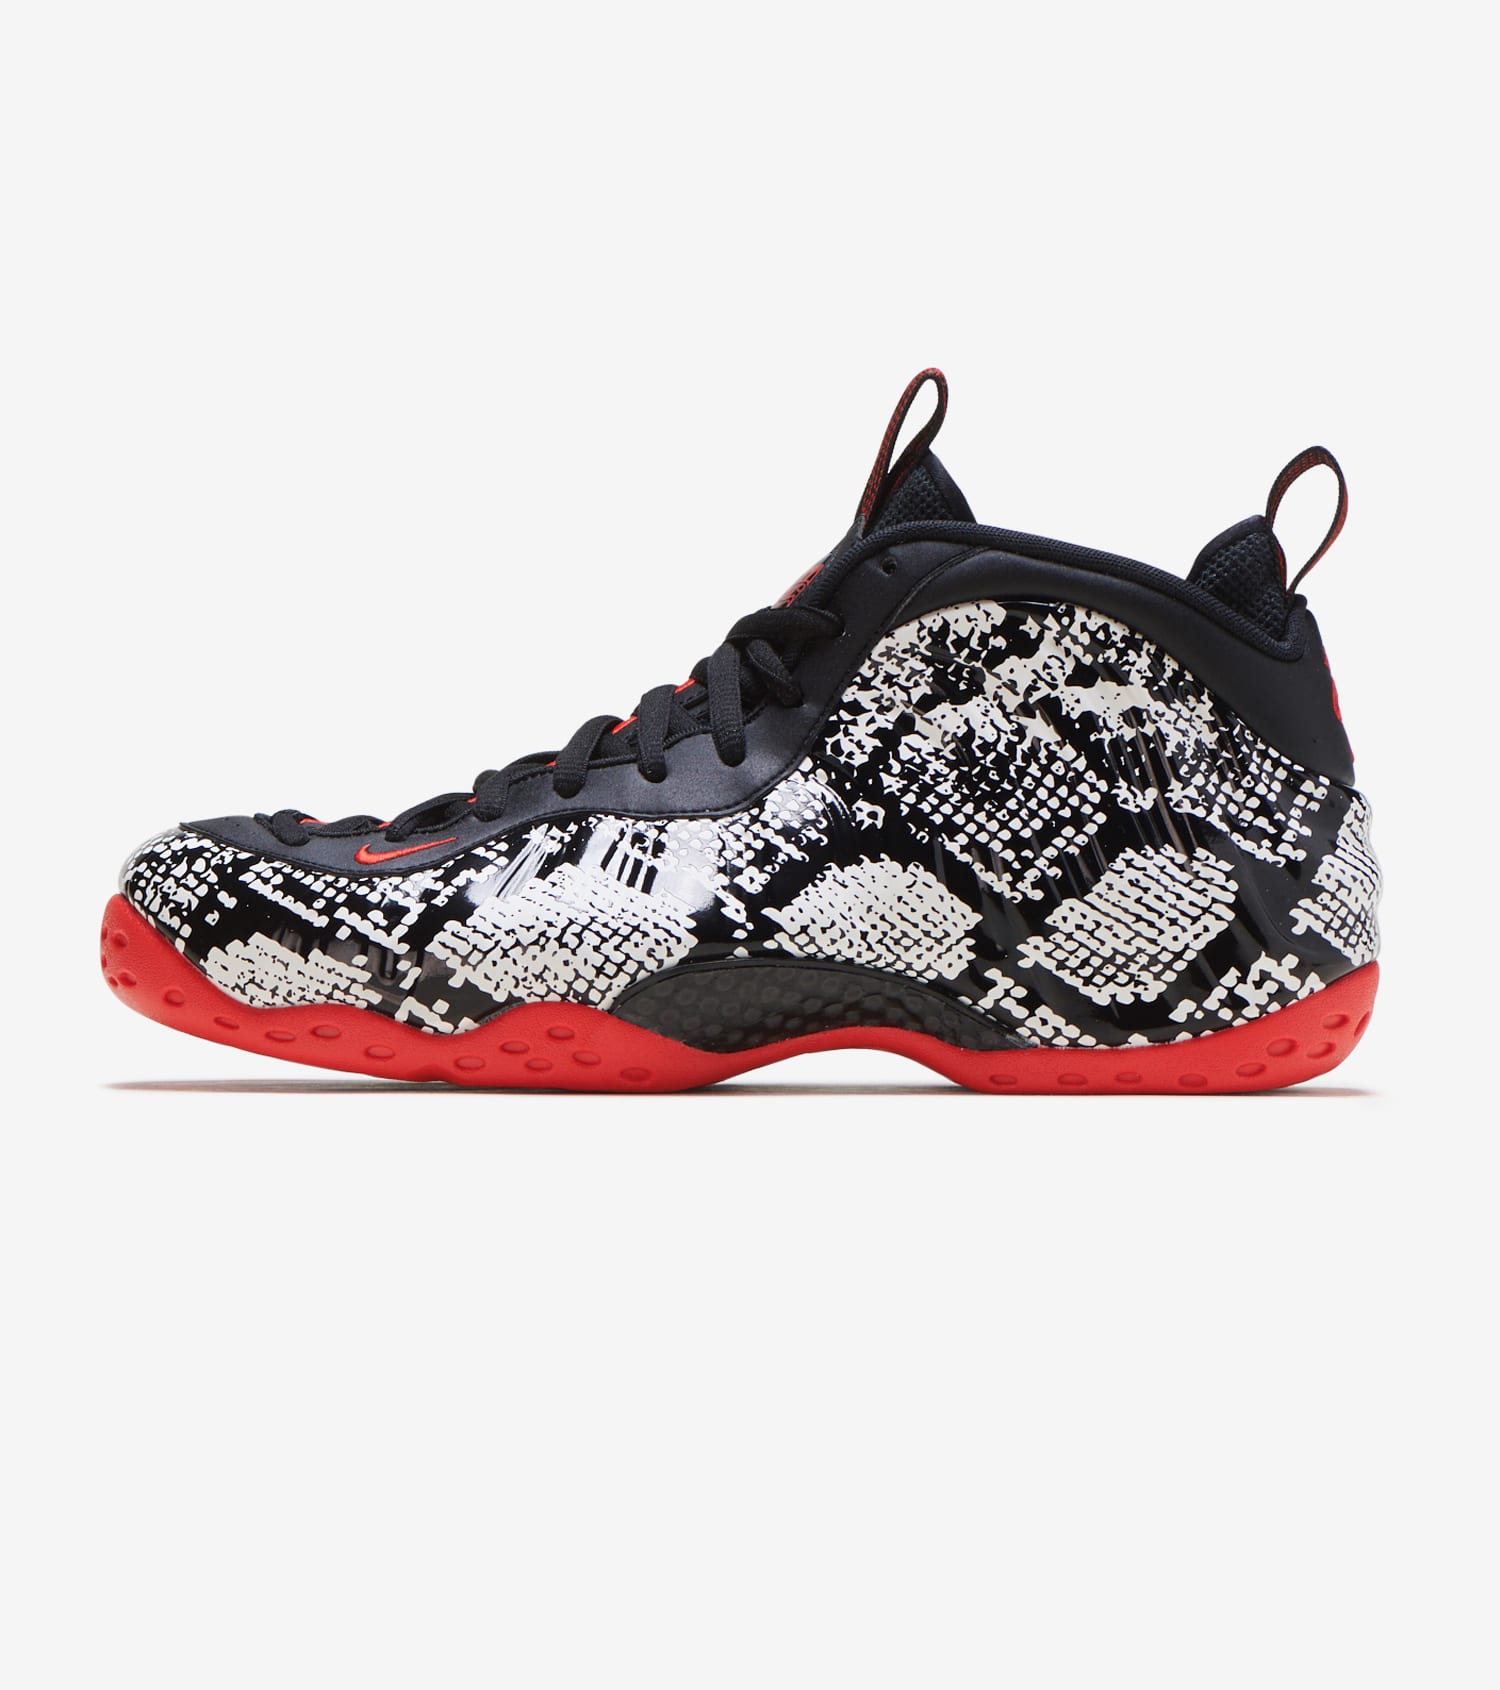 Is The Nike Air Foamposite One Alternate Galaxy On Your